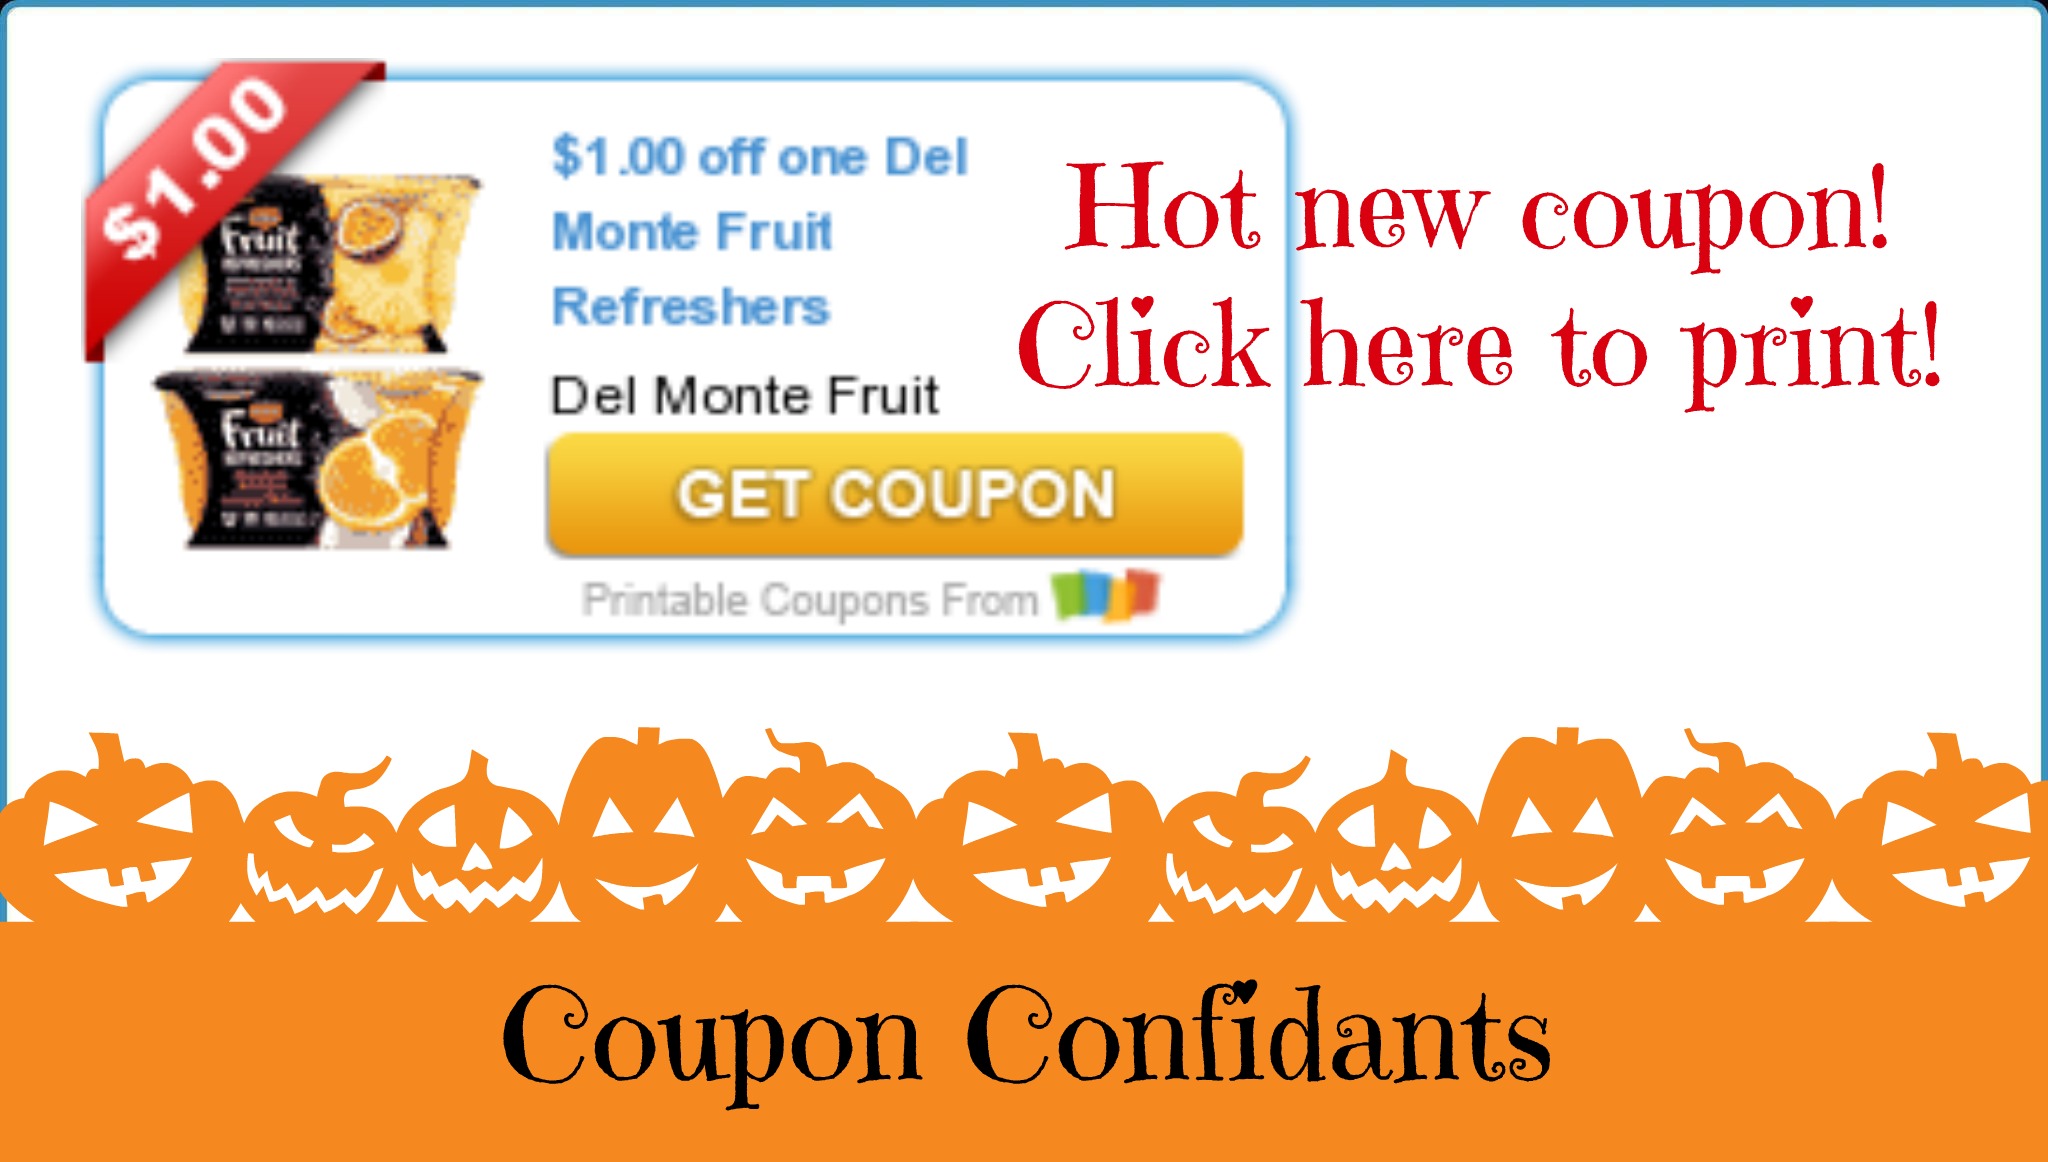 Hot, new coupon 1/1 Del Monte Fruit refreshers! Print now!!! Don't